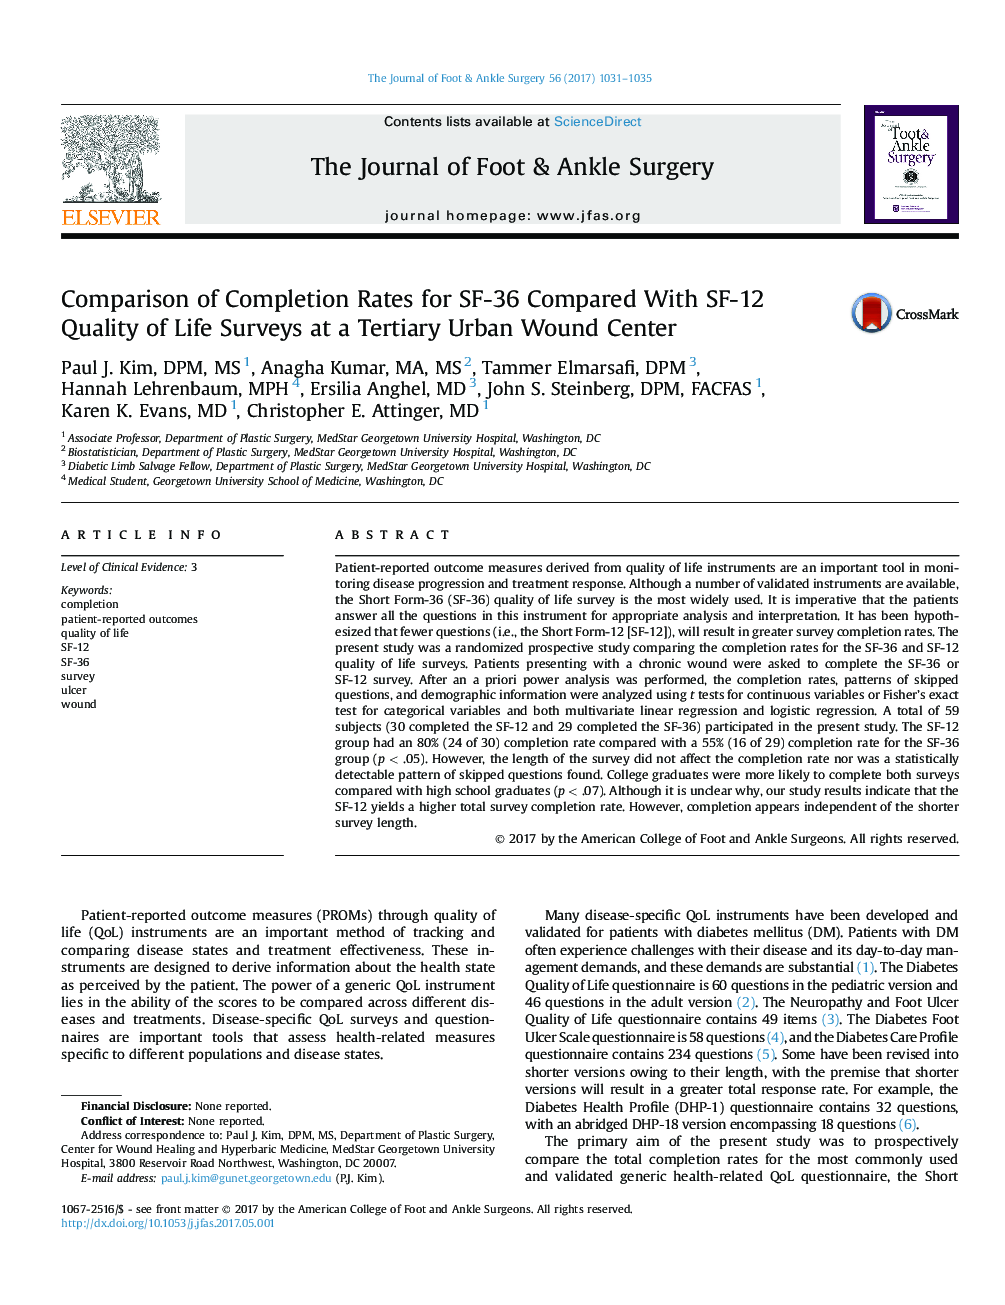 Comparison of Completion Rates for SF-36 Compared With SF-12 Quality of Life Surveys at a Tertiary Urban Wound Center